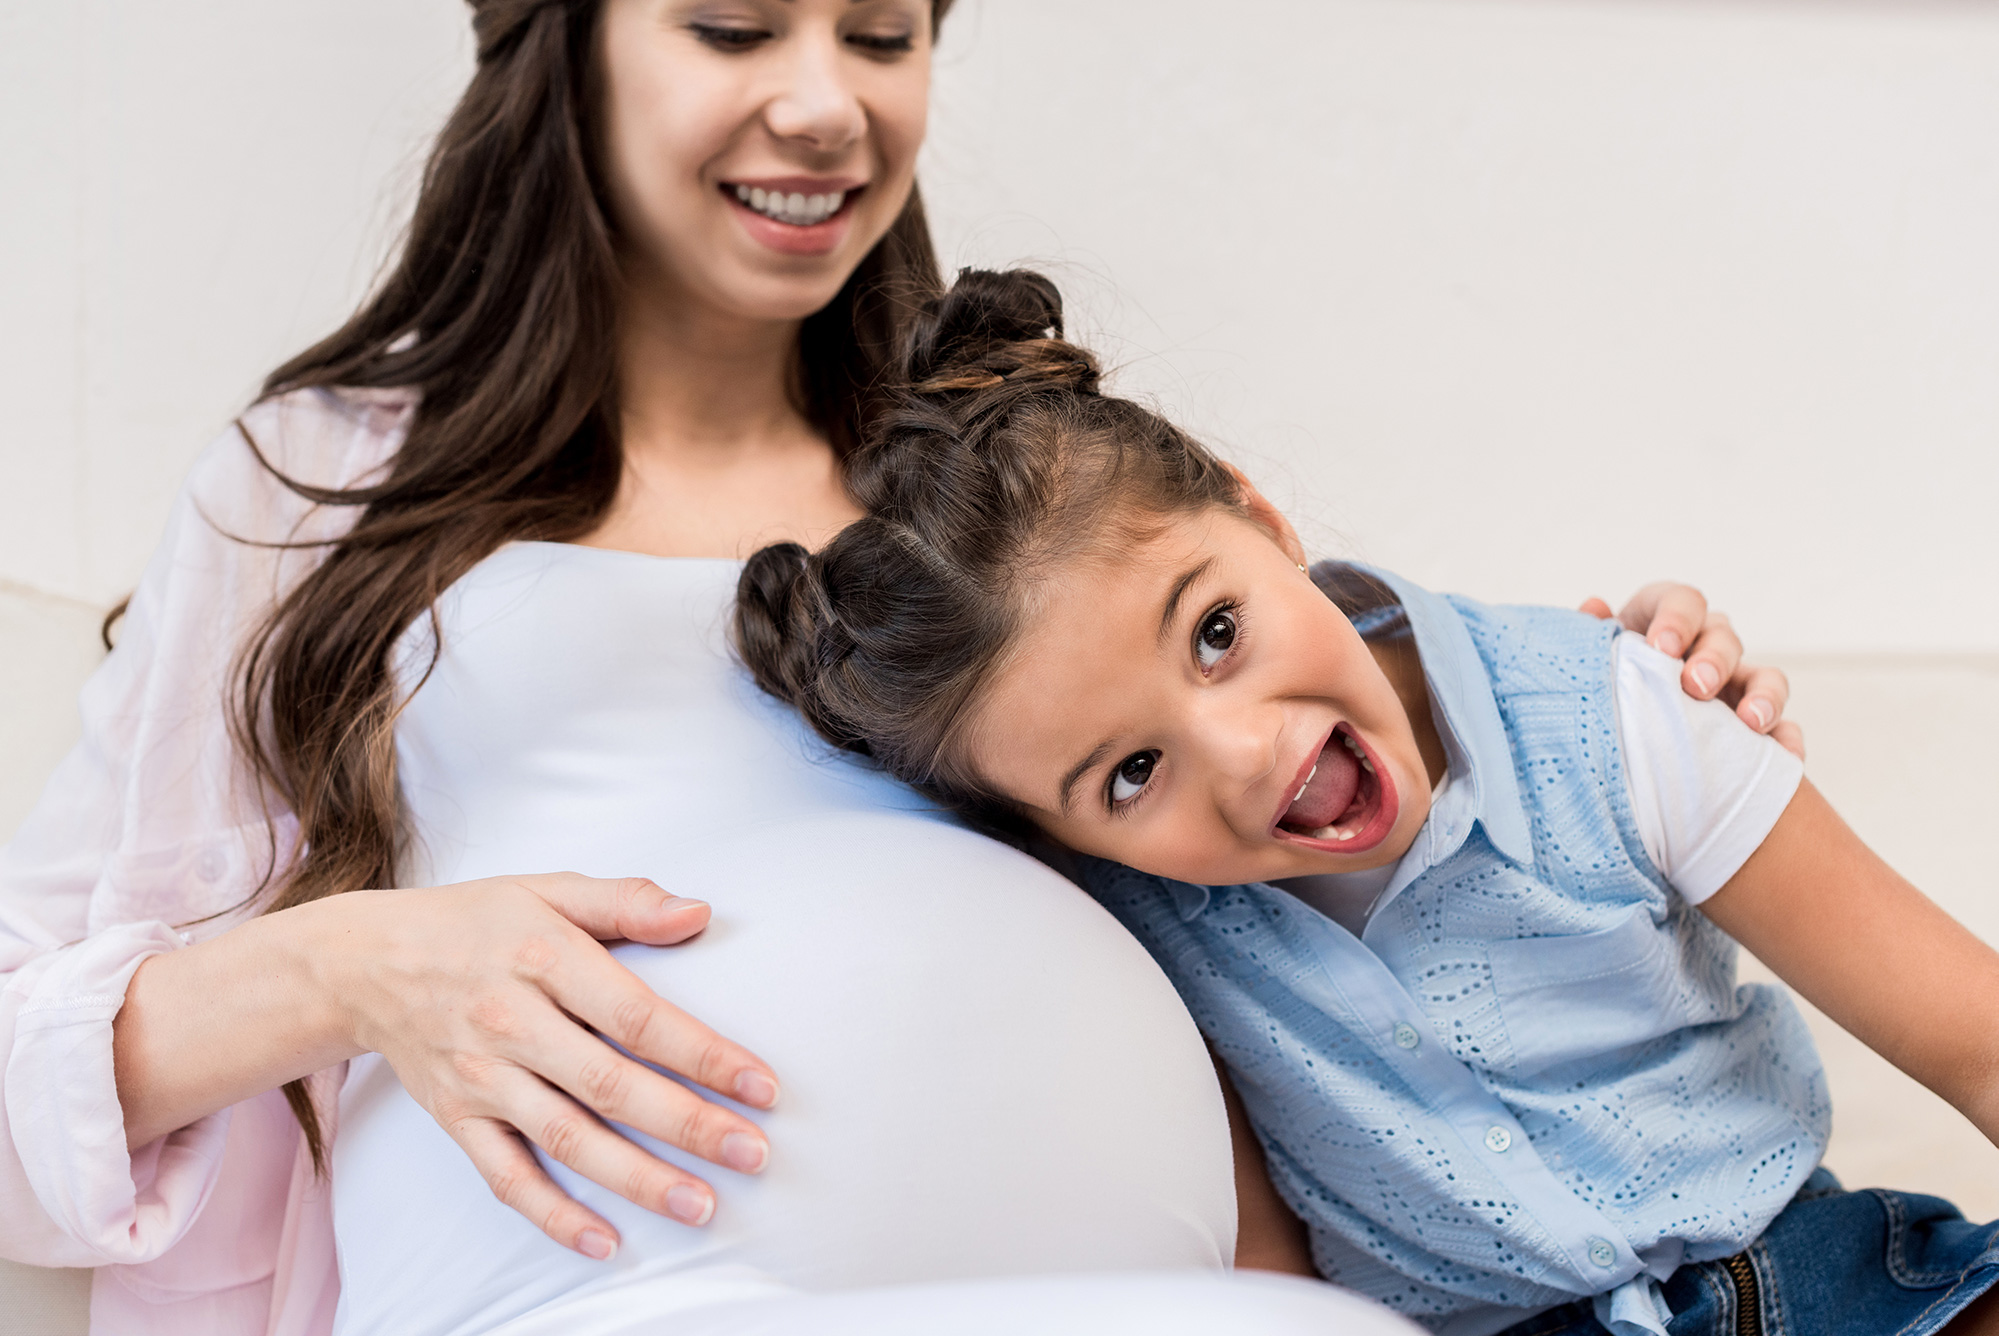 Pregnant woman with long brown hair puts her hand on her pregnant belly as a young girl with a happy face listens to the belly.